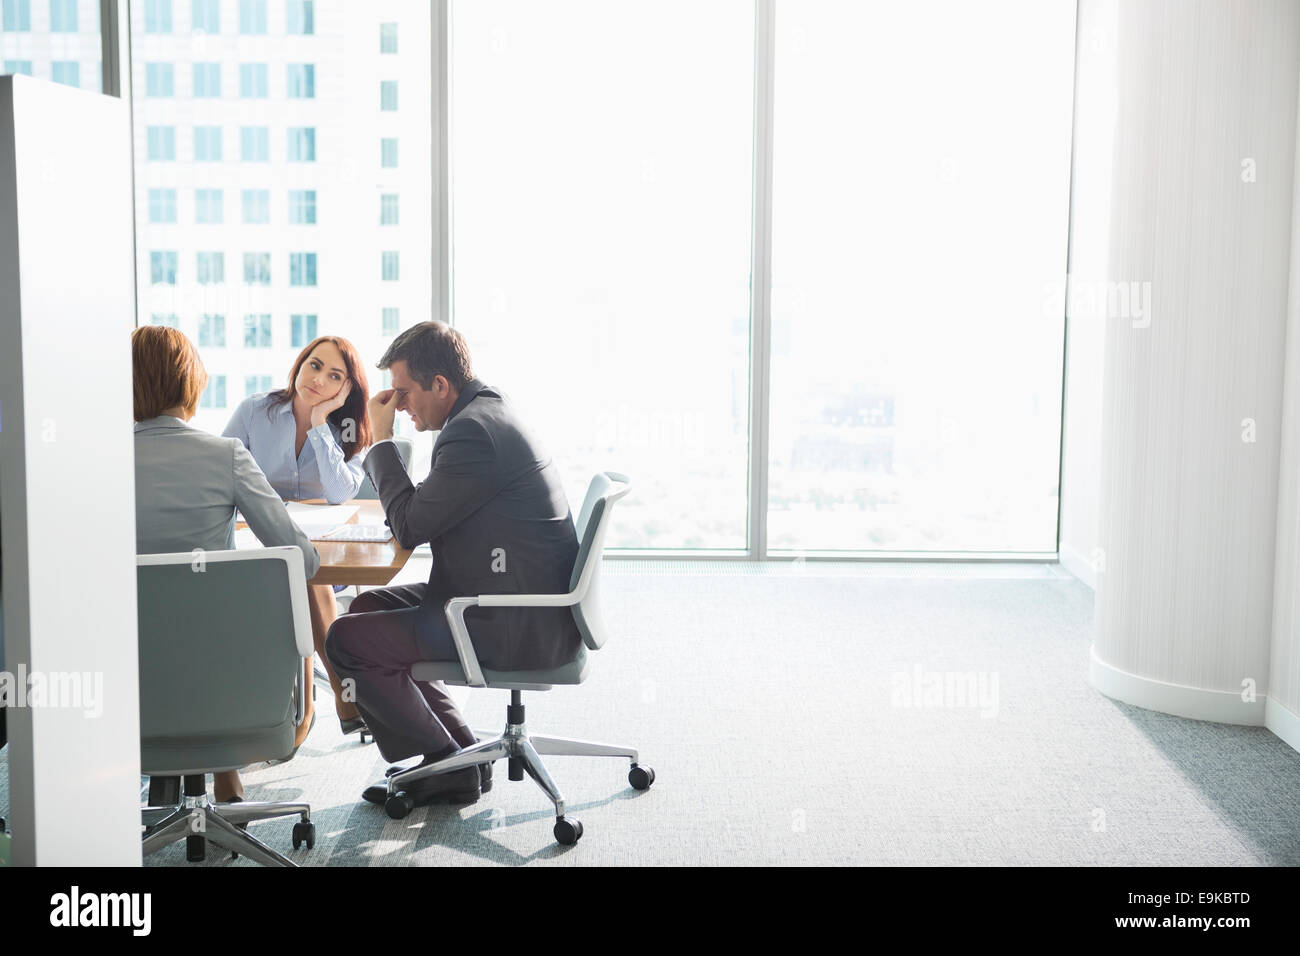 Exhausted businesspeople in meeting Stock Photo